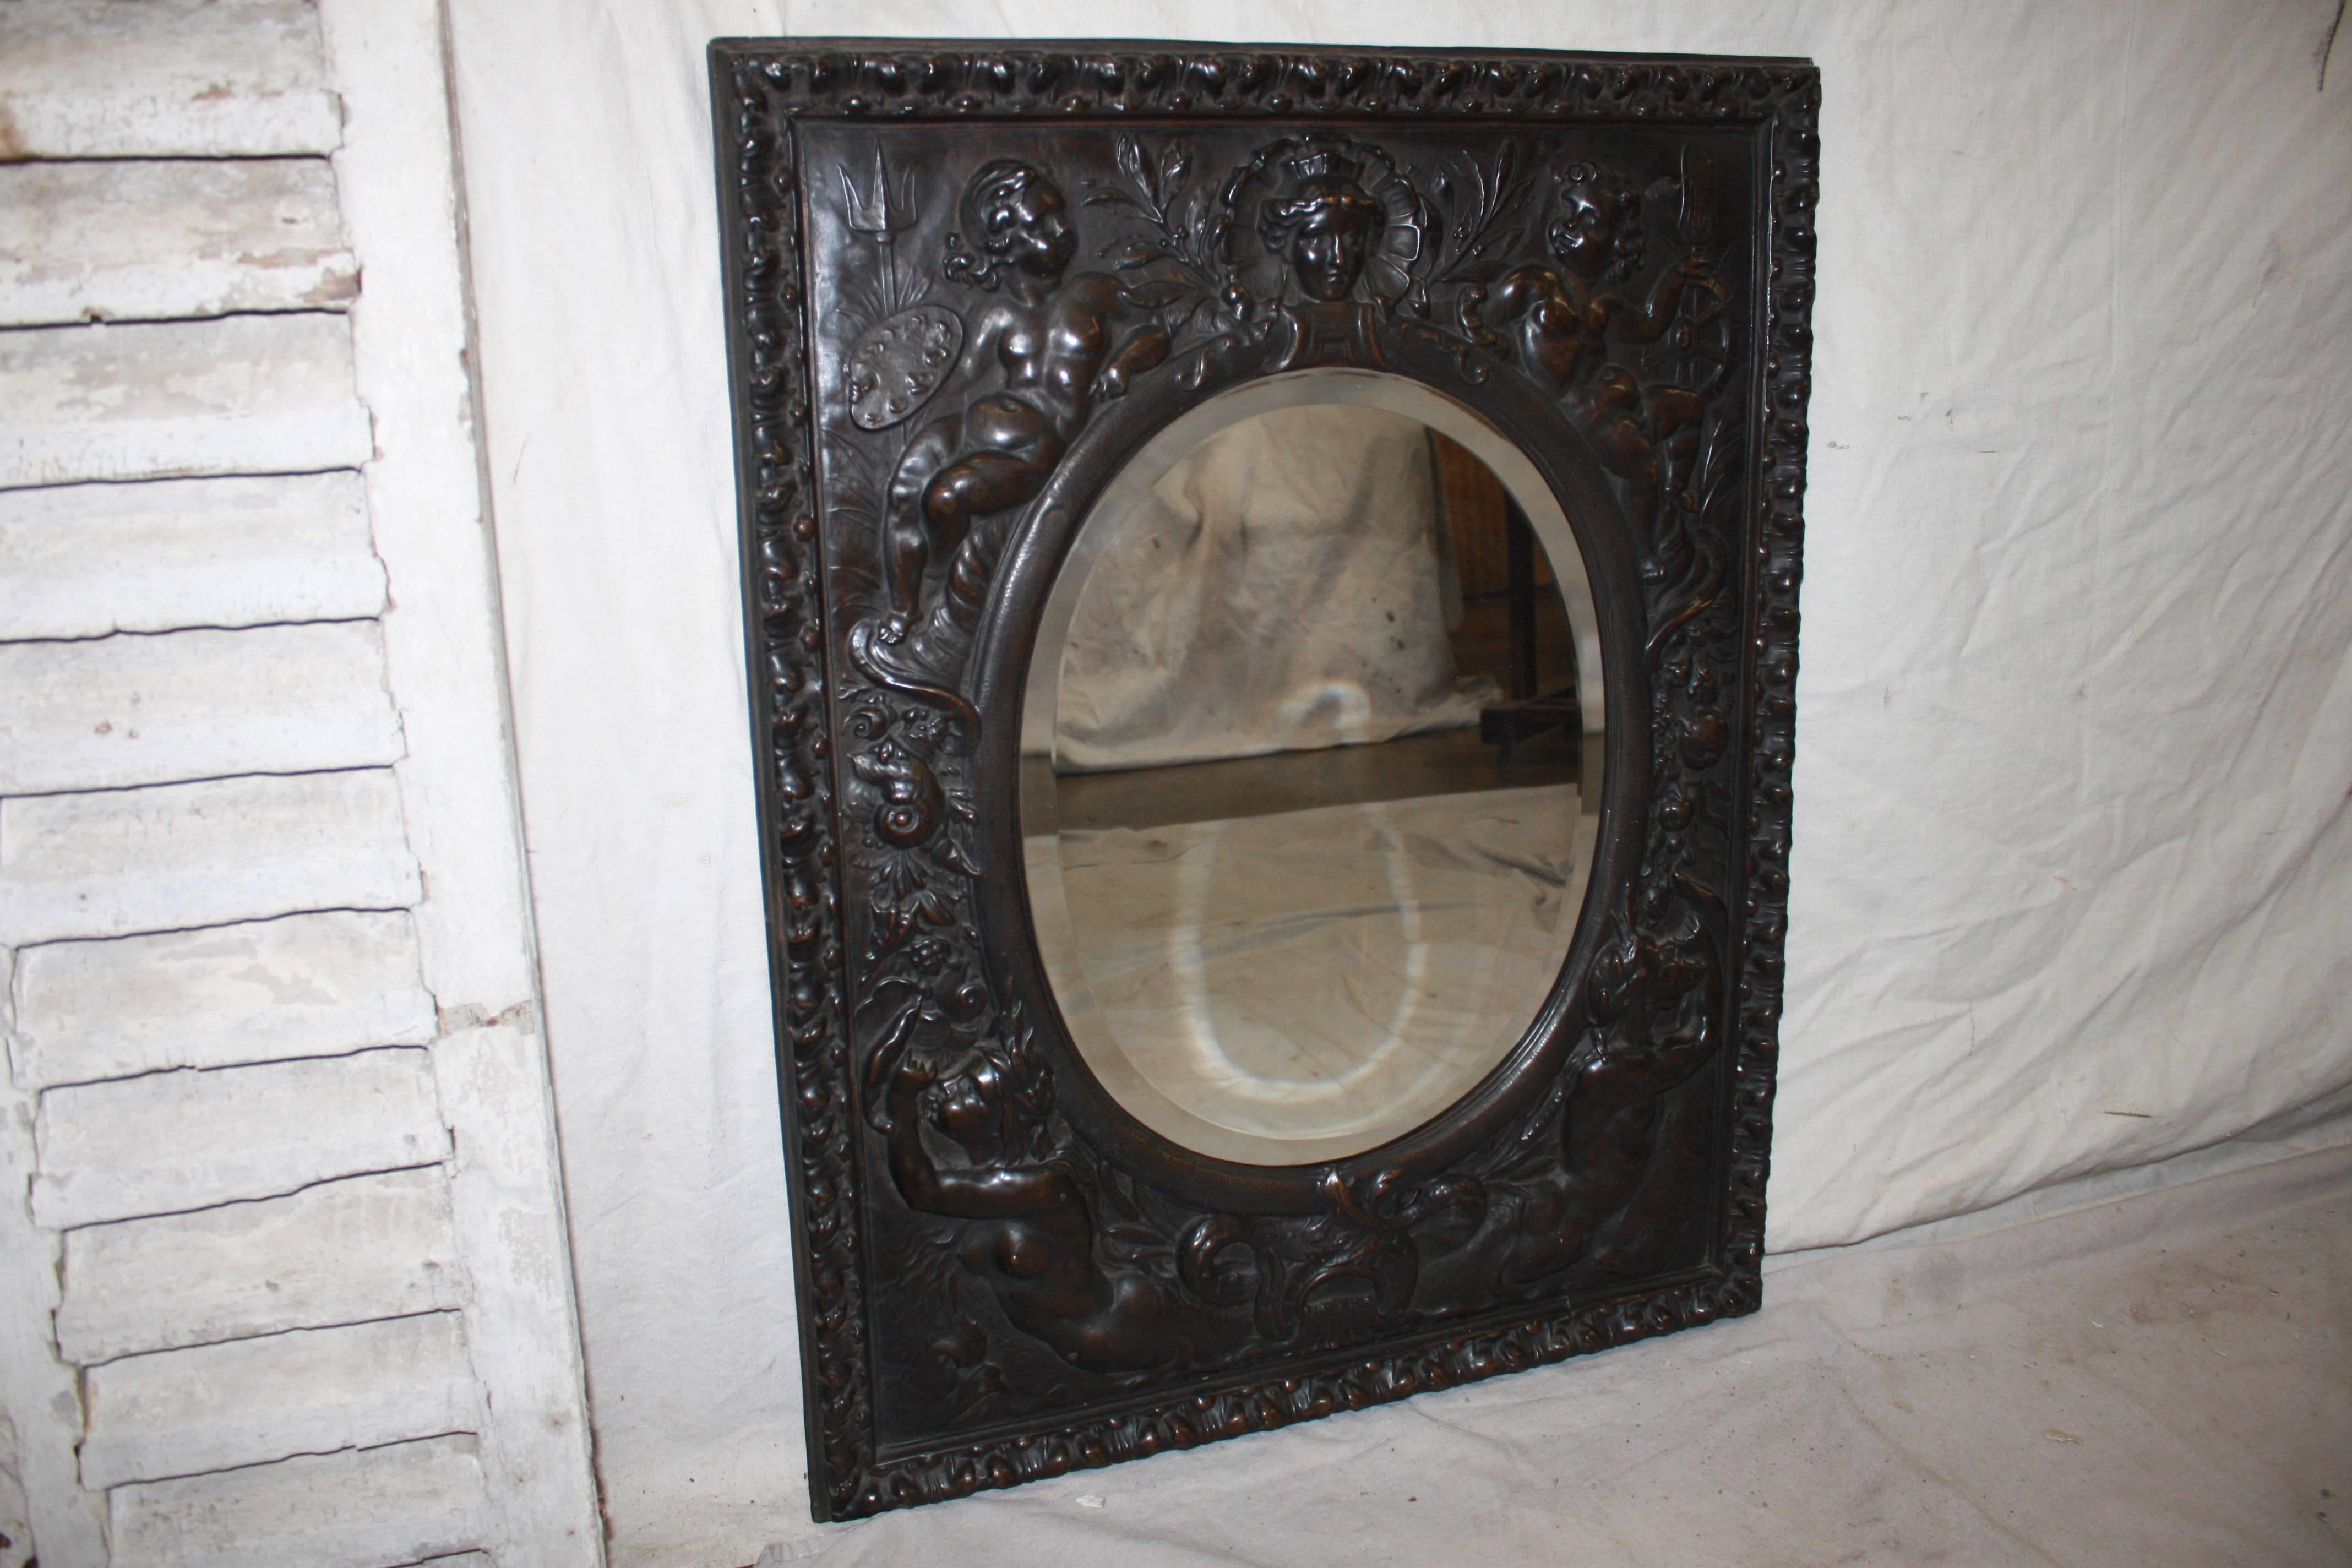 19th century French mirror. The frame is in metal provided with an embossed pattern.